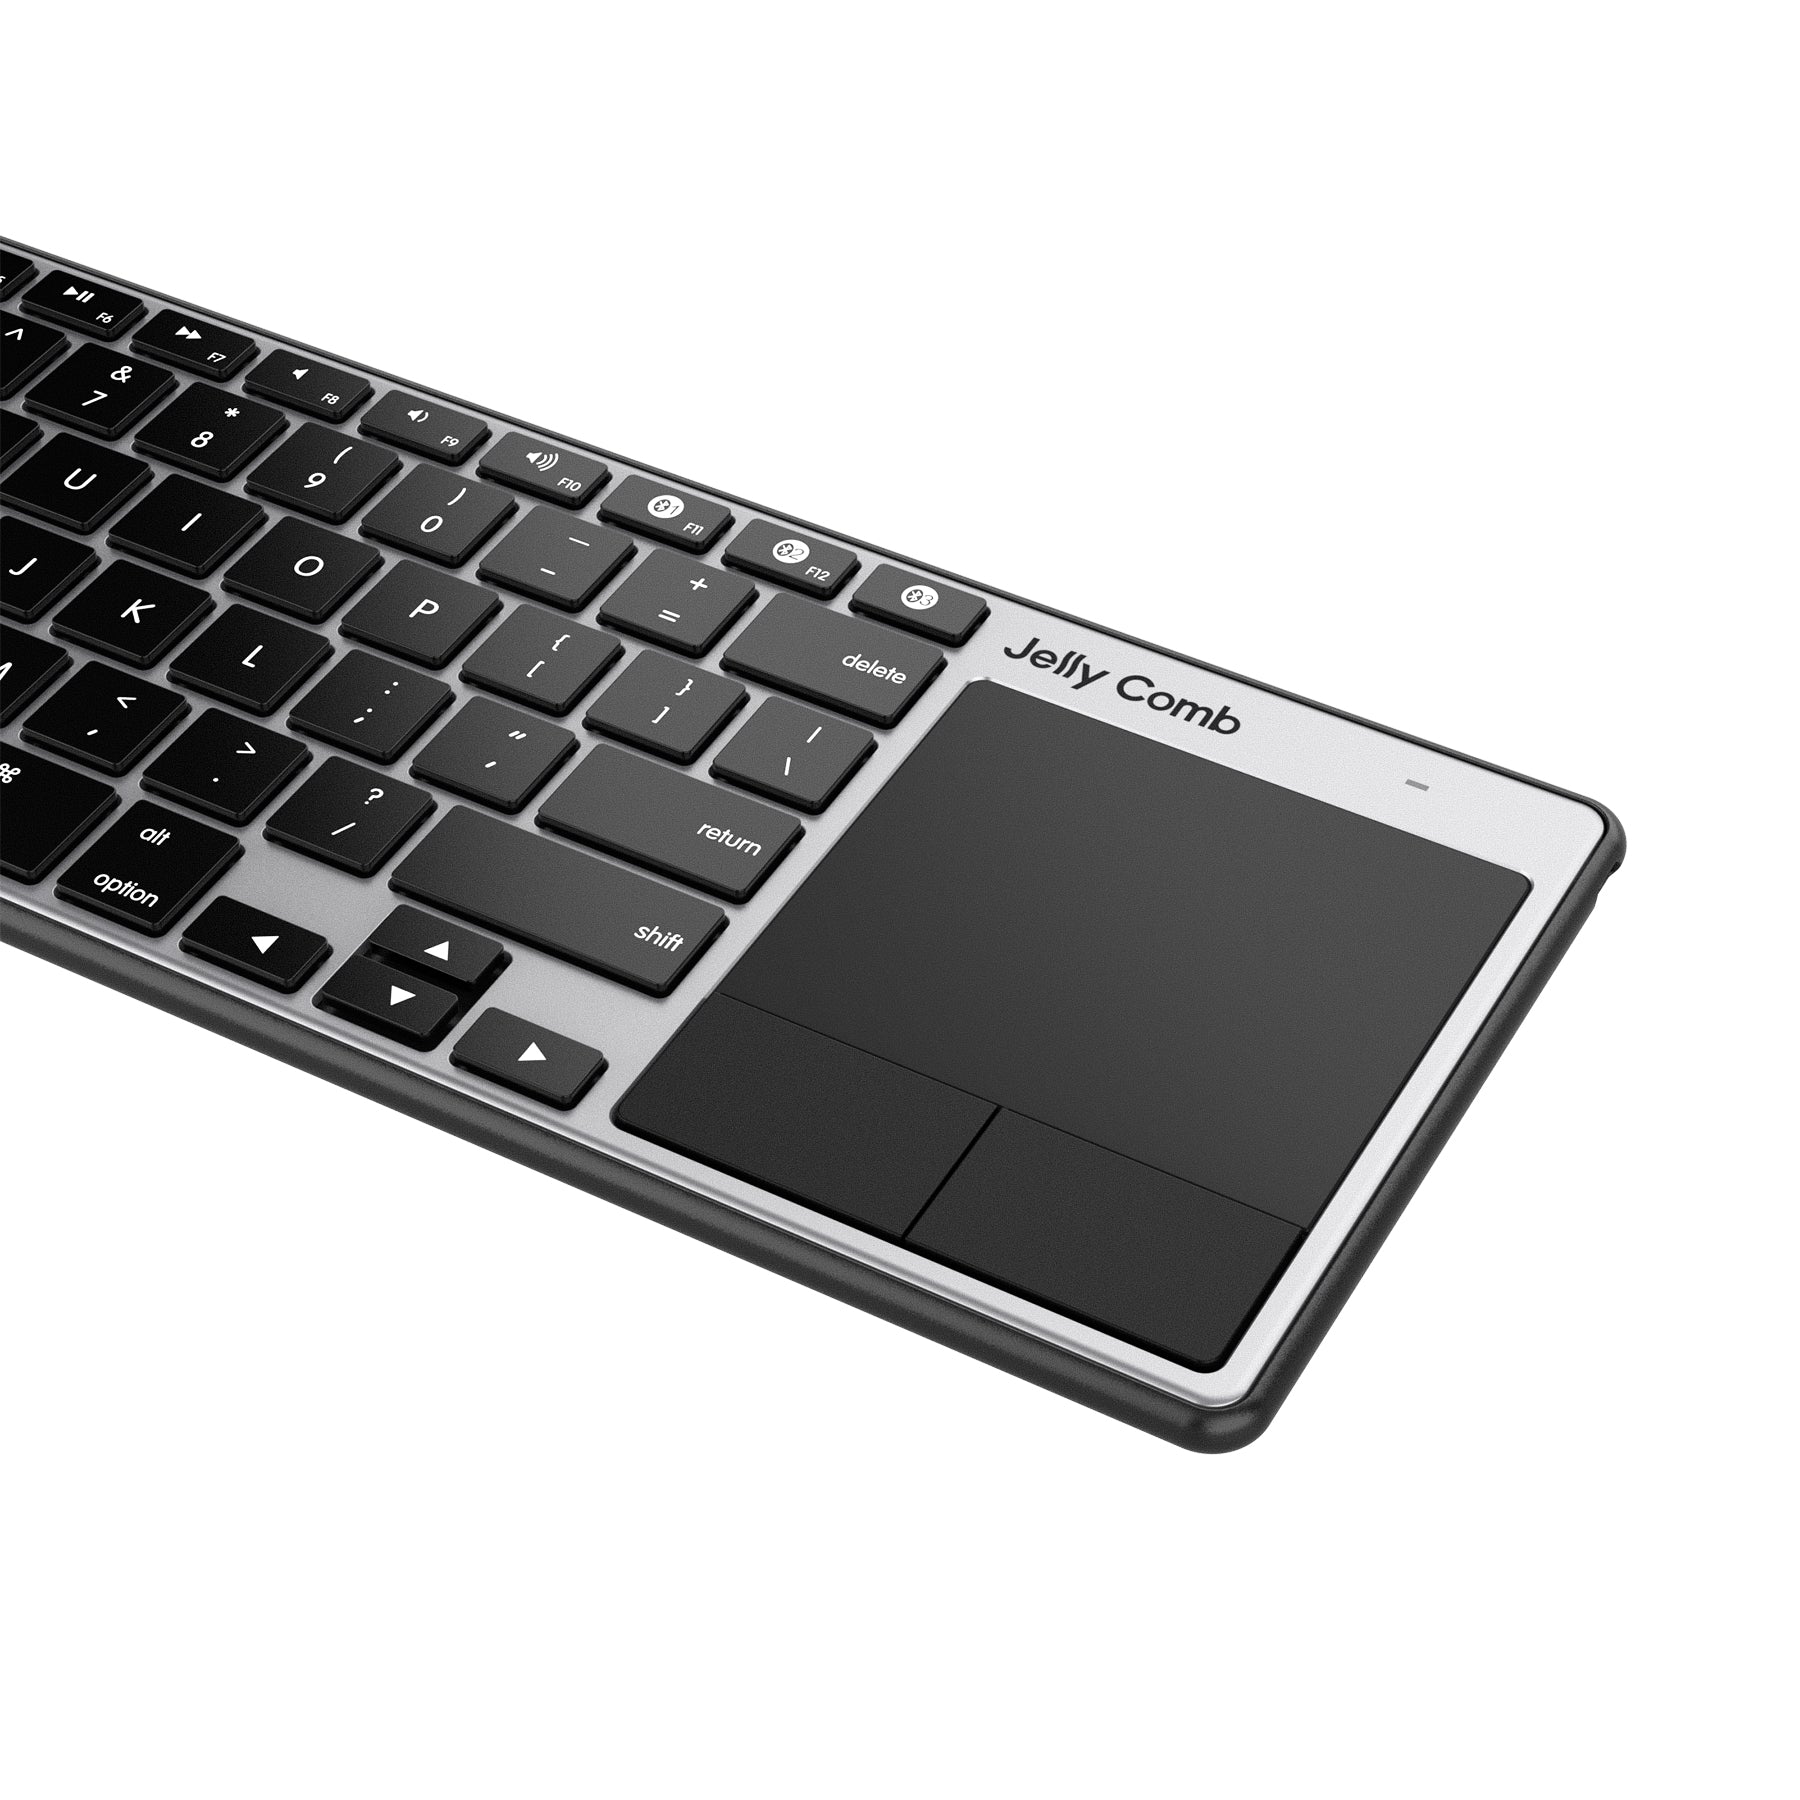 Built In Trackpad Multi Device Keyboard For Mac Jellycomb K200 Jelly Comb